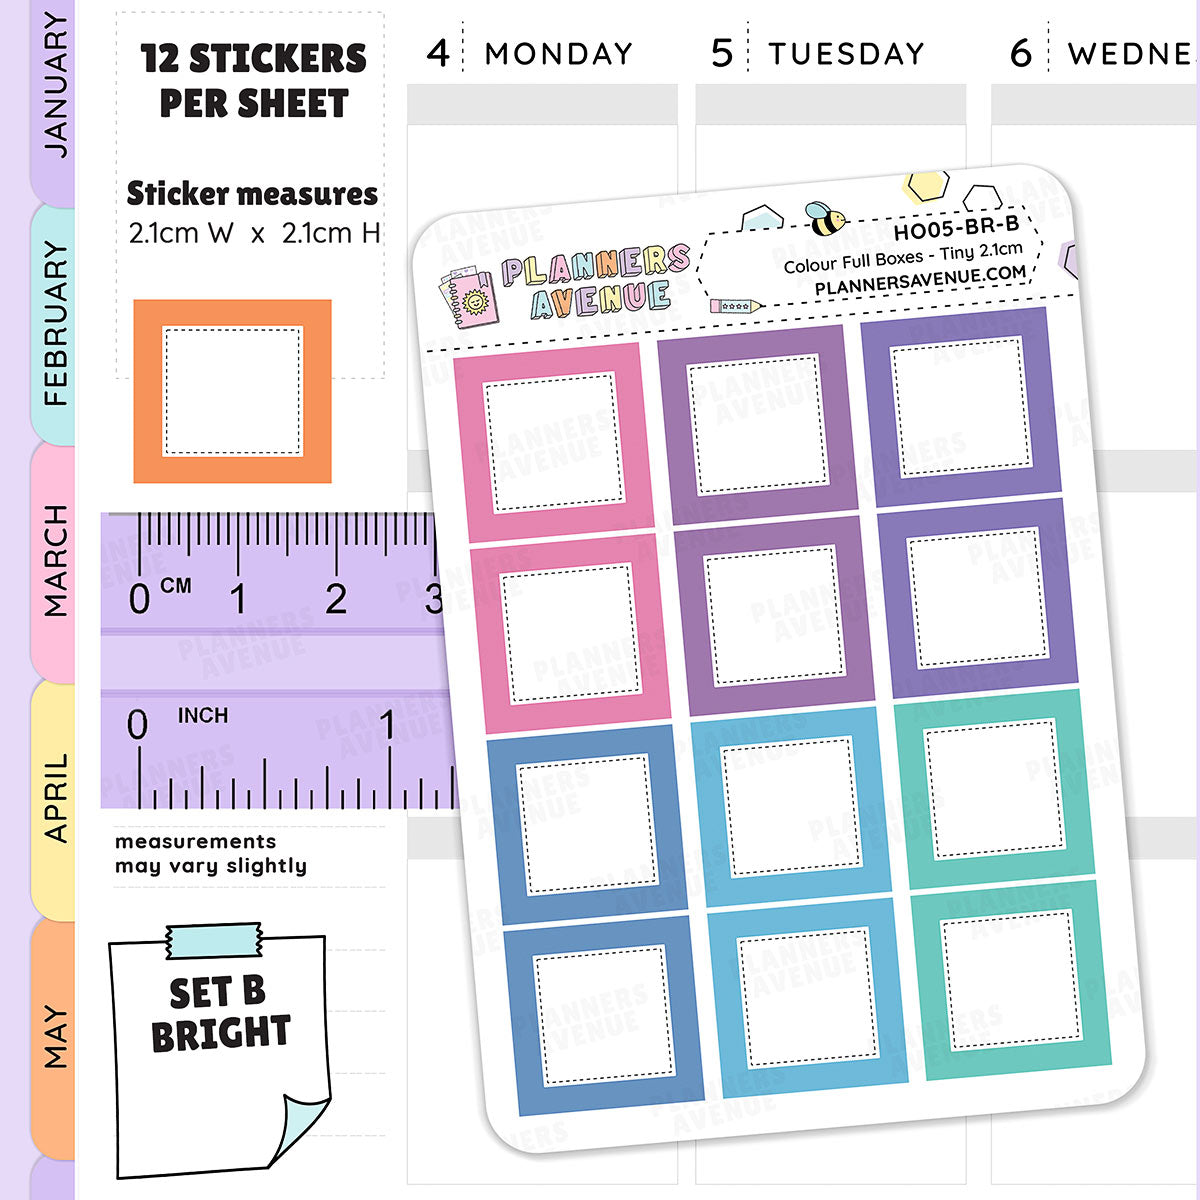 Hobonichi Full Boxes Functional Stickers